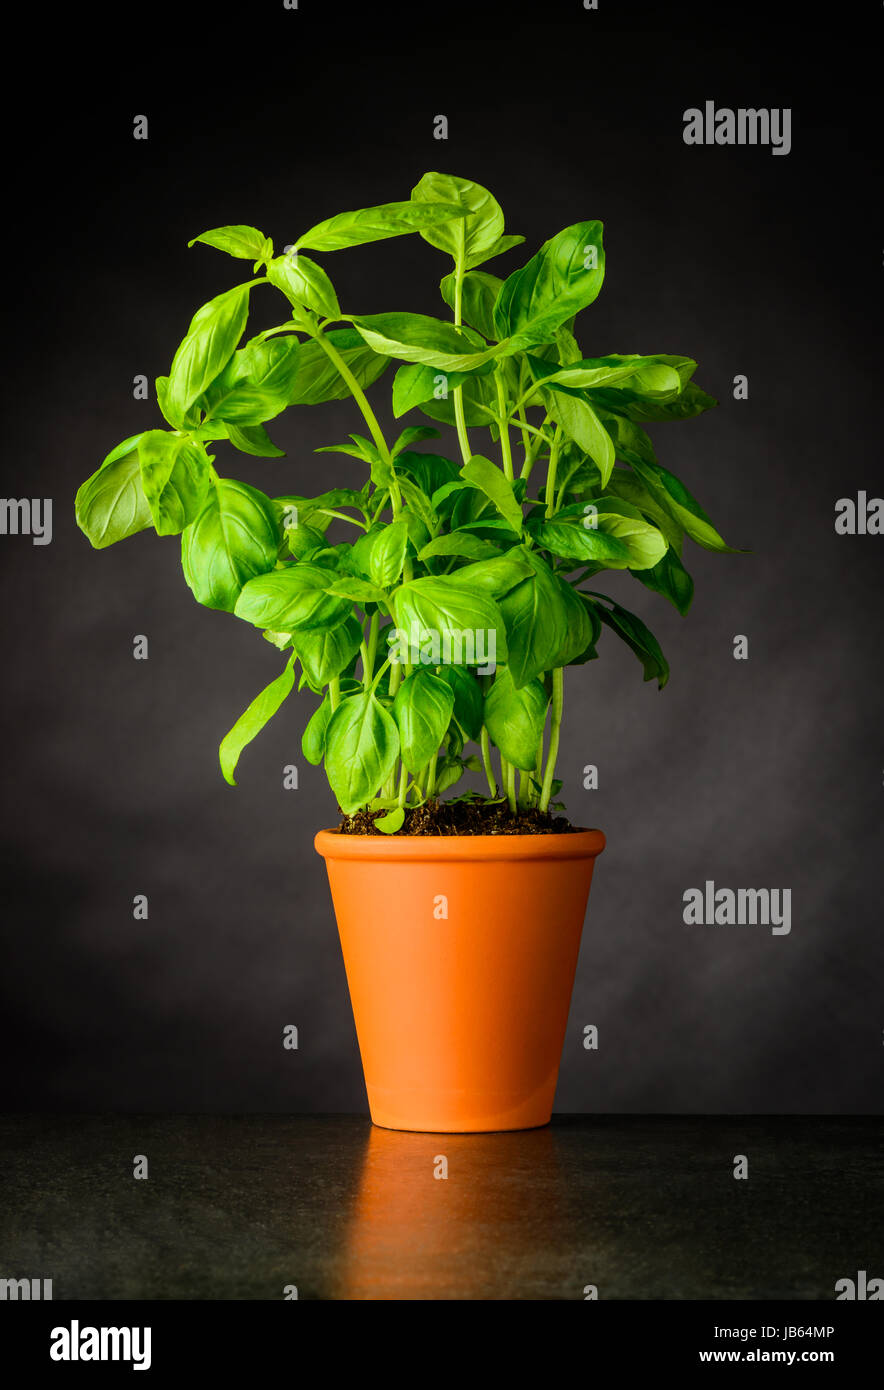 Green Organic Basil Plant Growing in Pottery Pot. Culinary Herb. Stock Photo